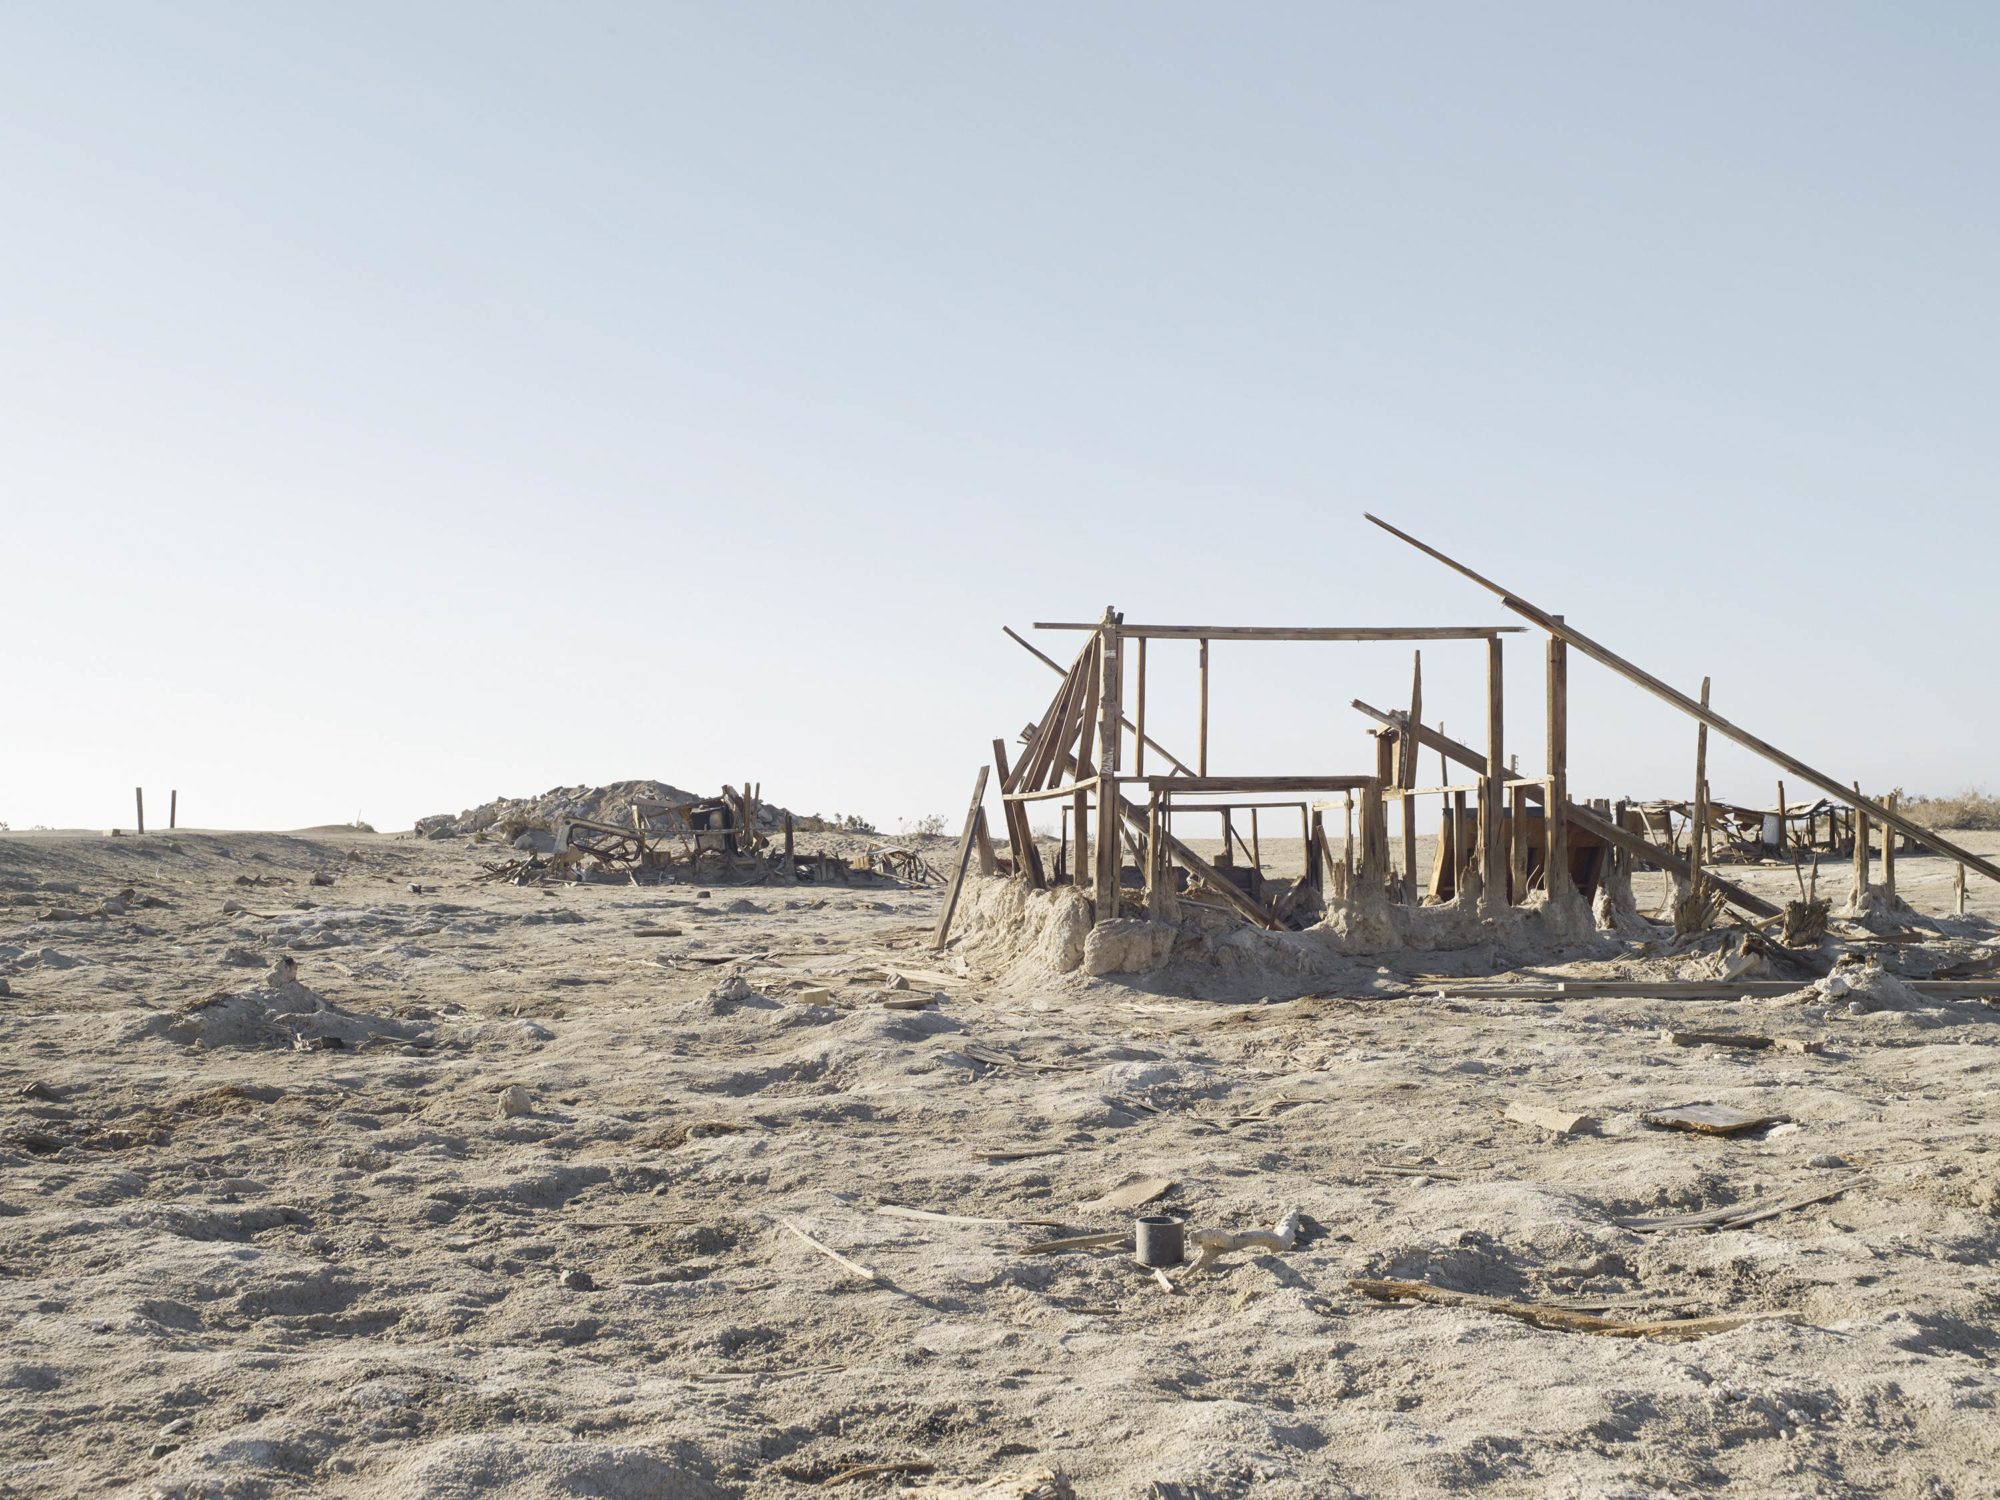 Bleach - Welcome To Bombay Beach Collection - Fine Art Photography by Toby Dixon